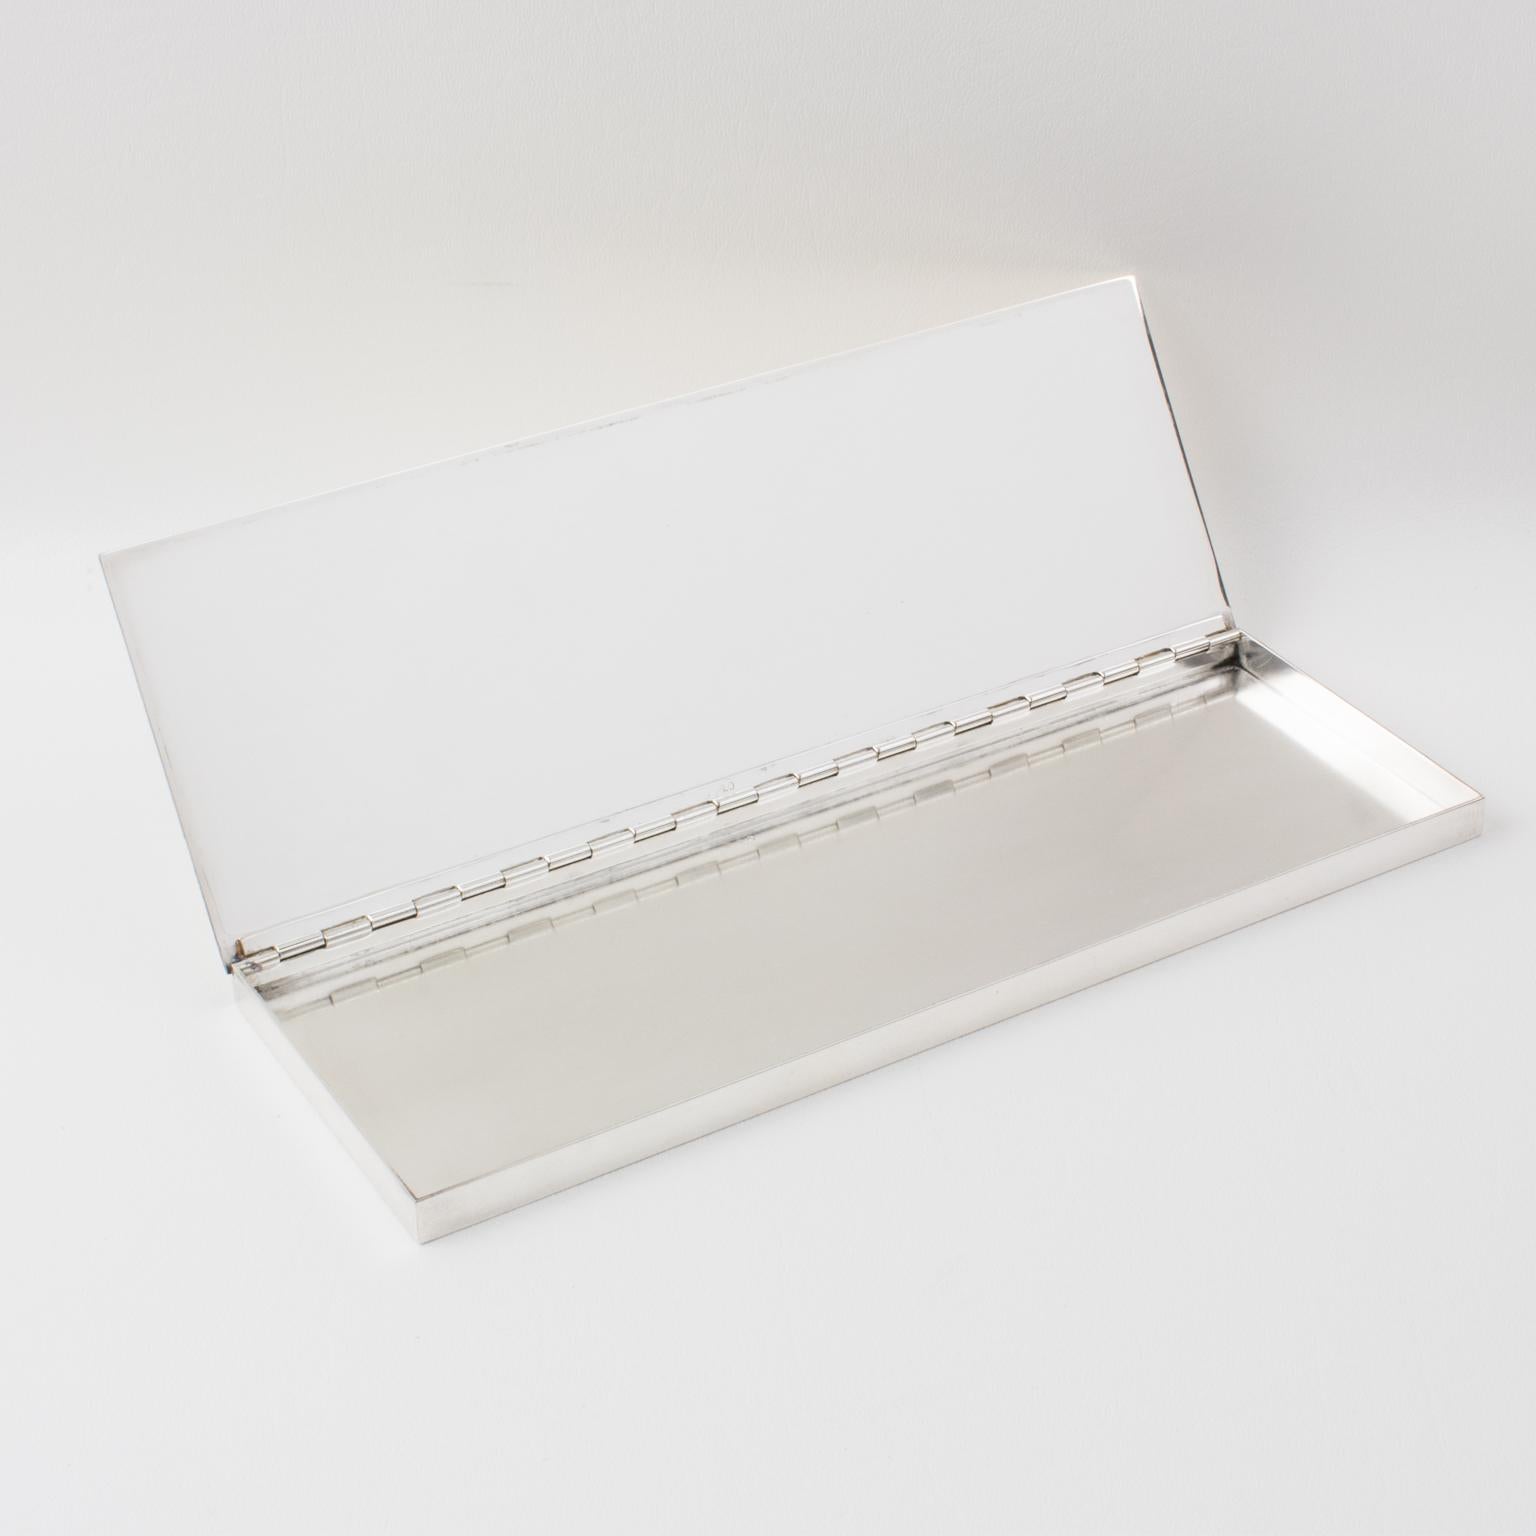 French Modernist Extra Long and Flat Silver Plate Box, 1960s For Sale